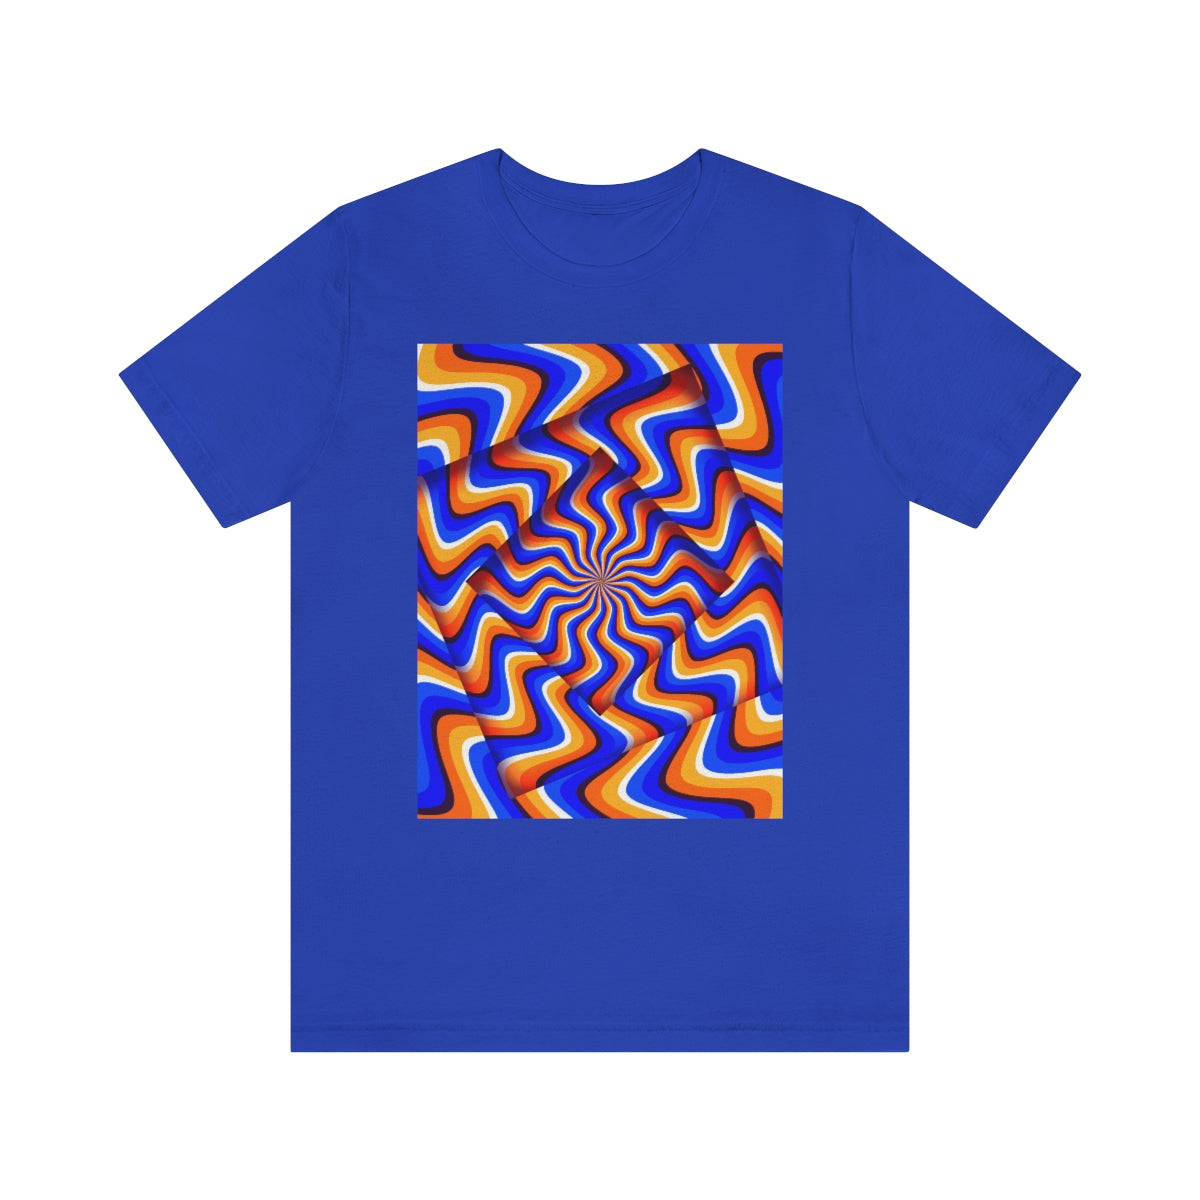 Unisex Jersey Short Sleeve Tee "Optical illusion Abstract turned frames"